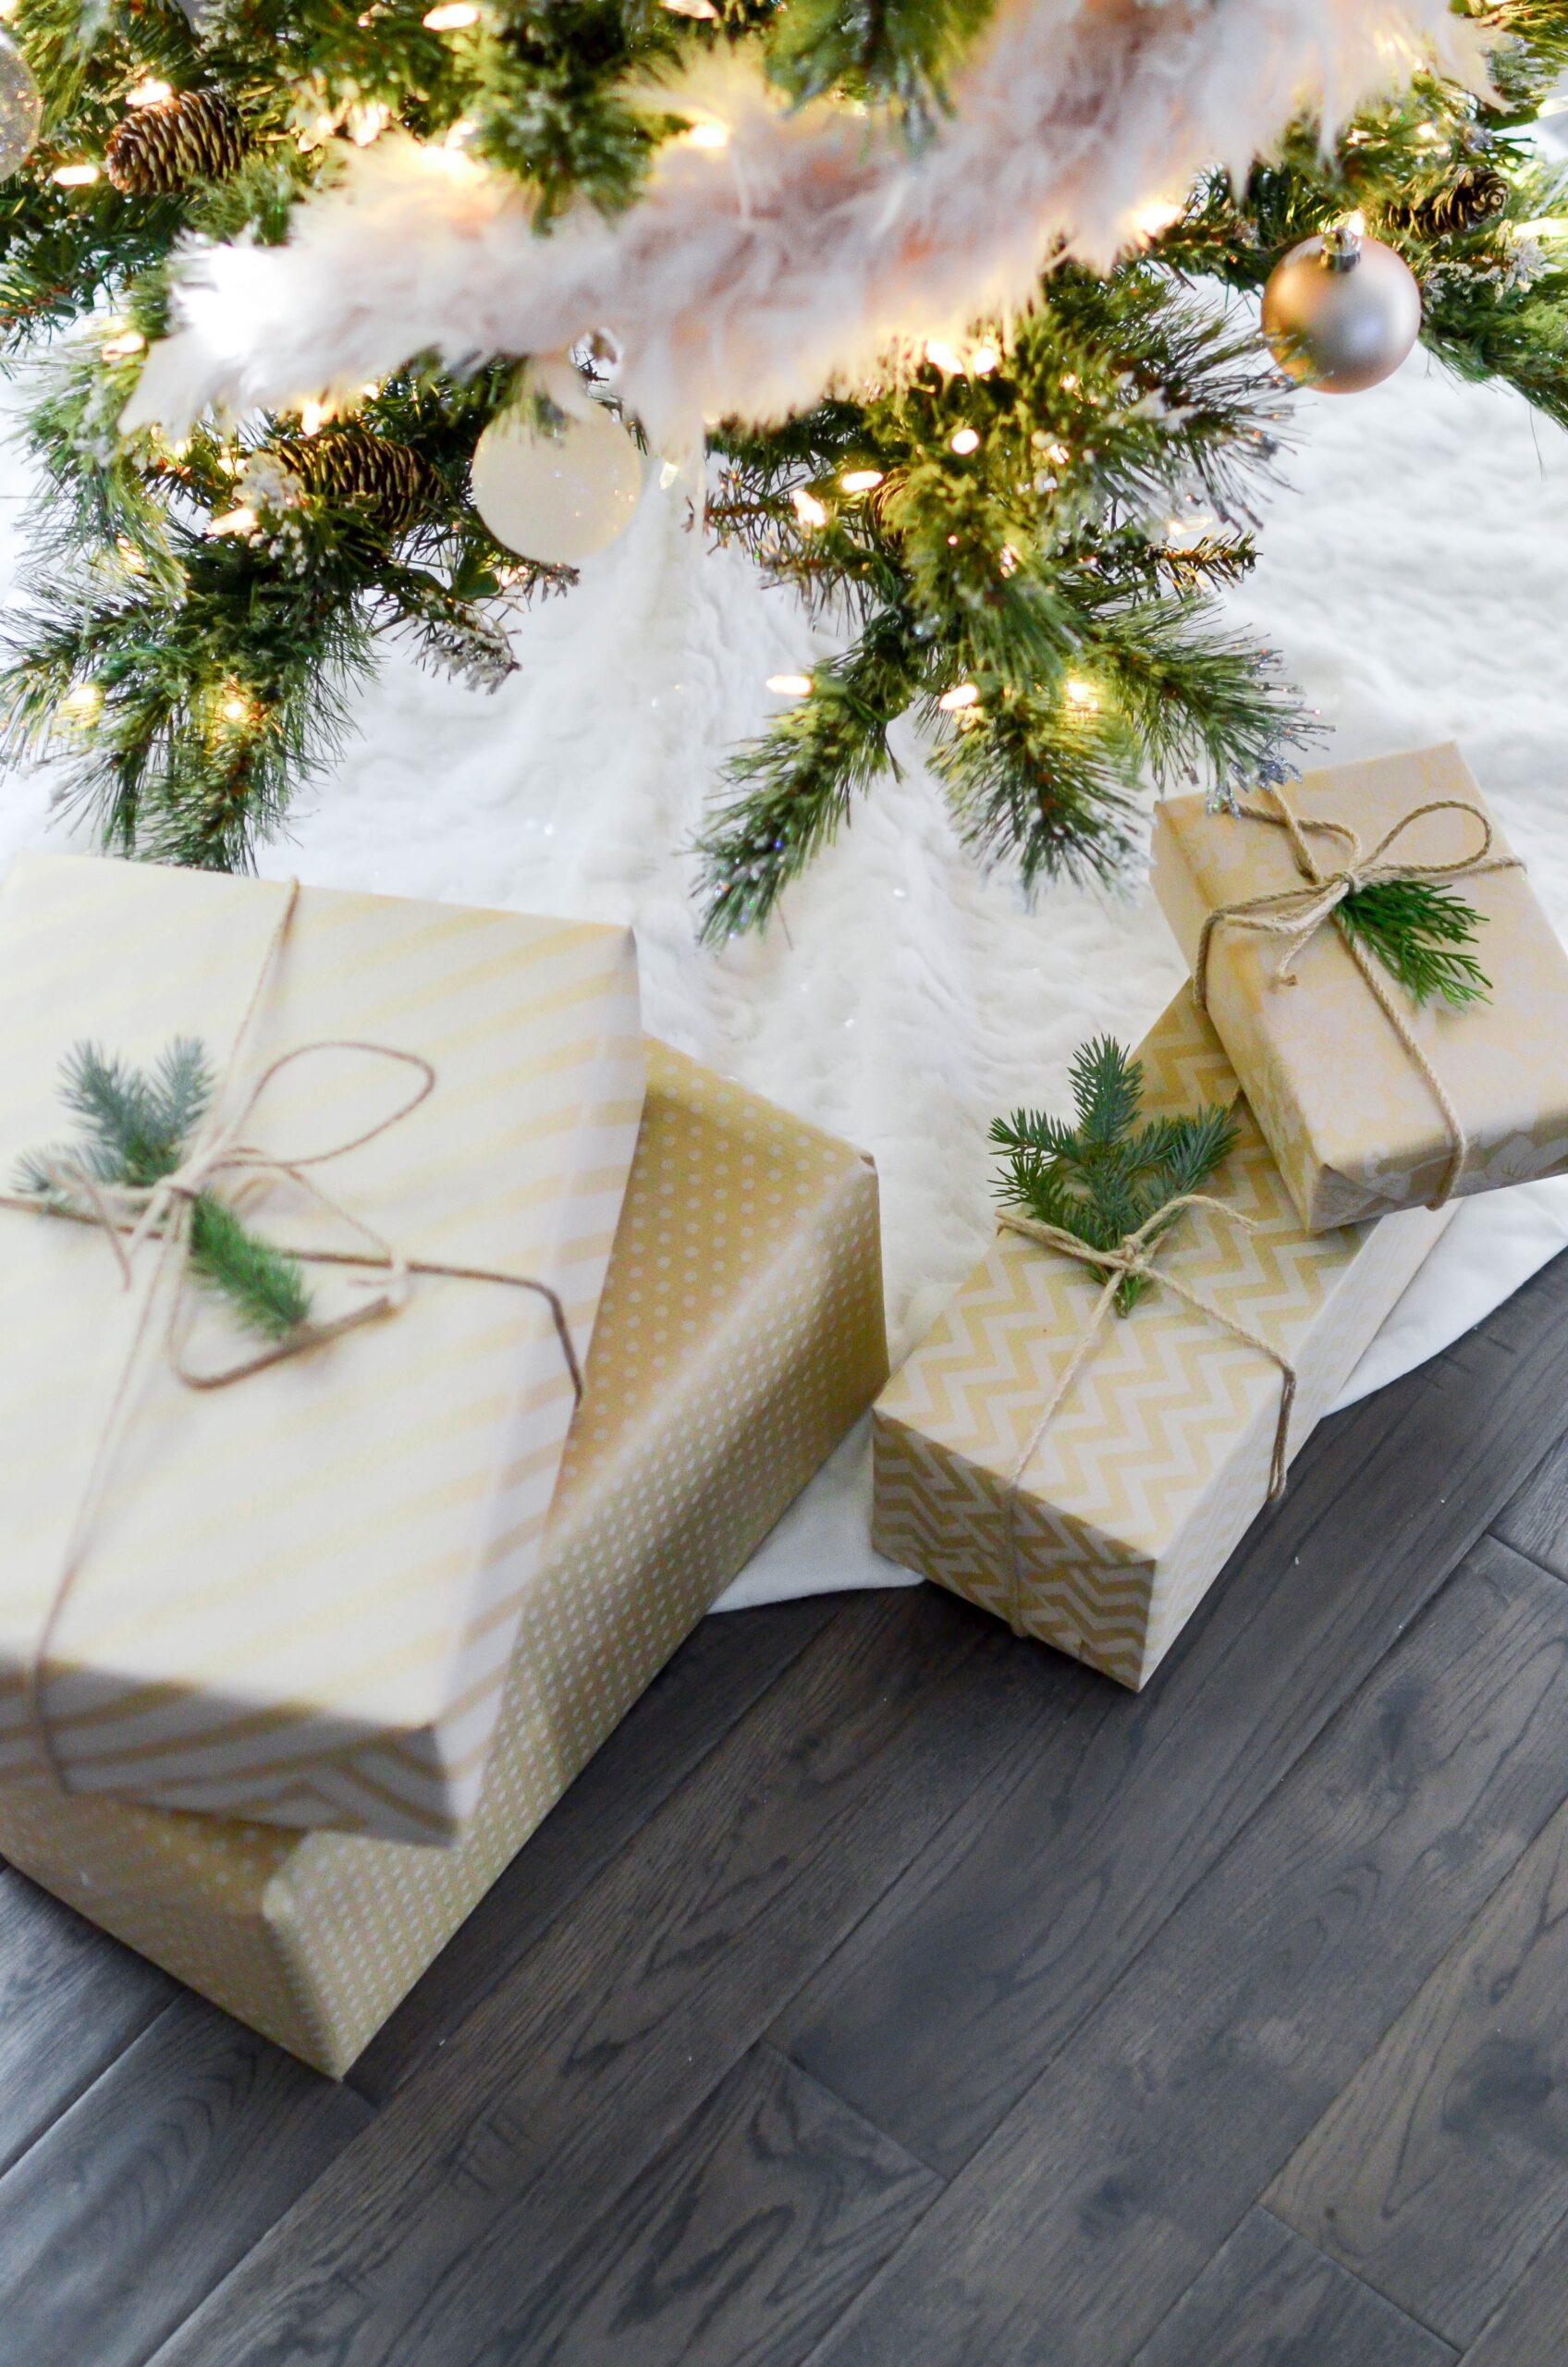 Elevate Well-Being: Well Chosen Christmas Gifts for Mental Health